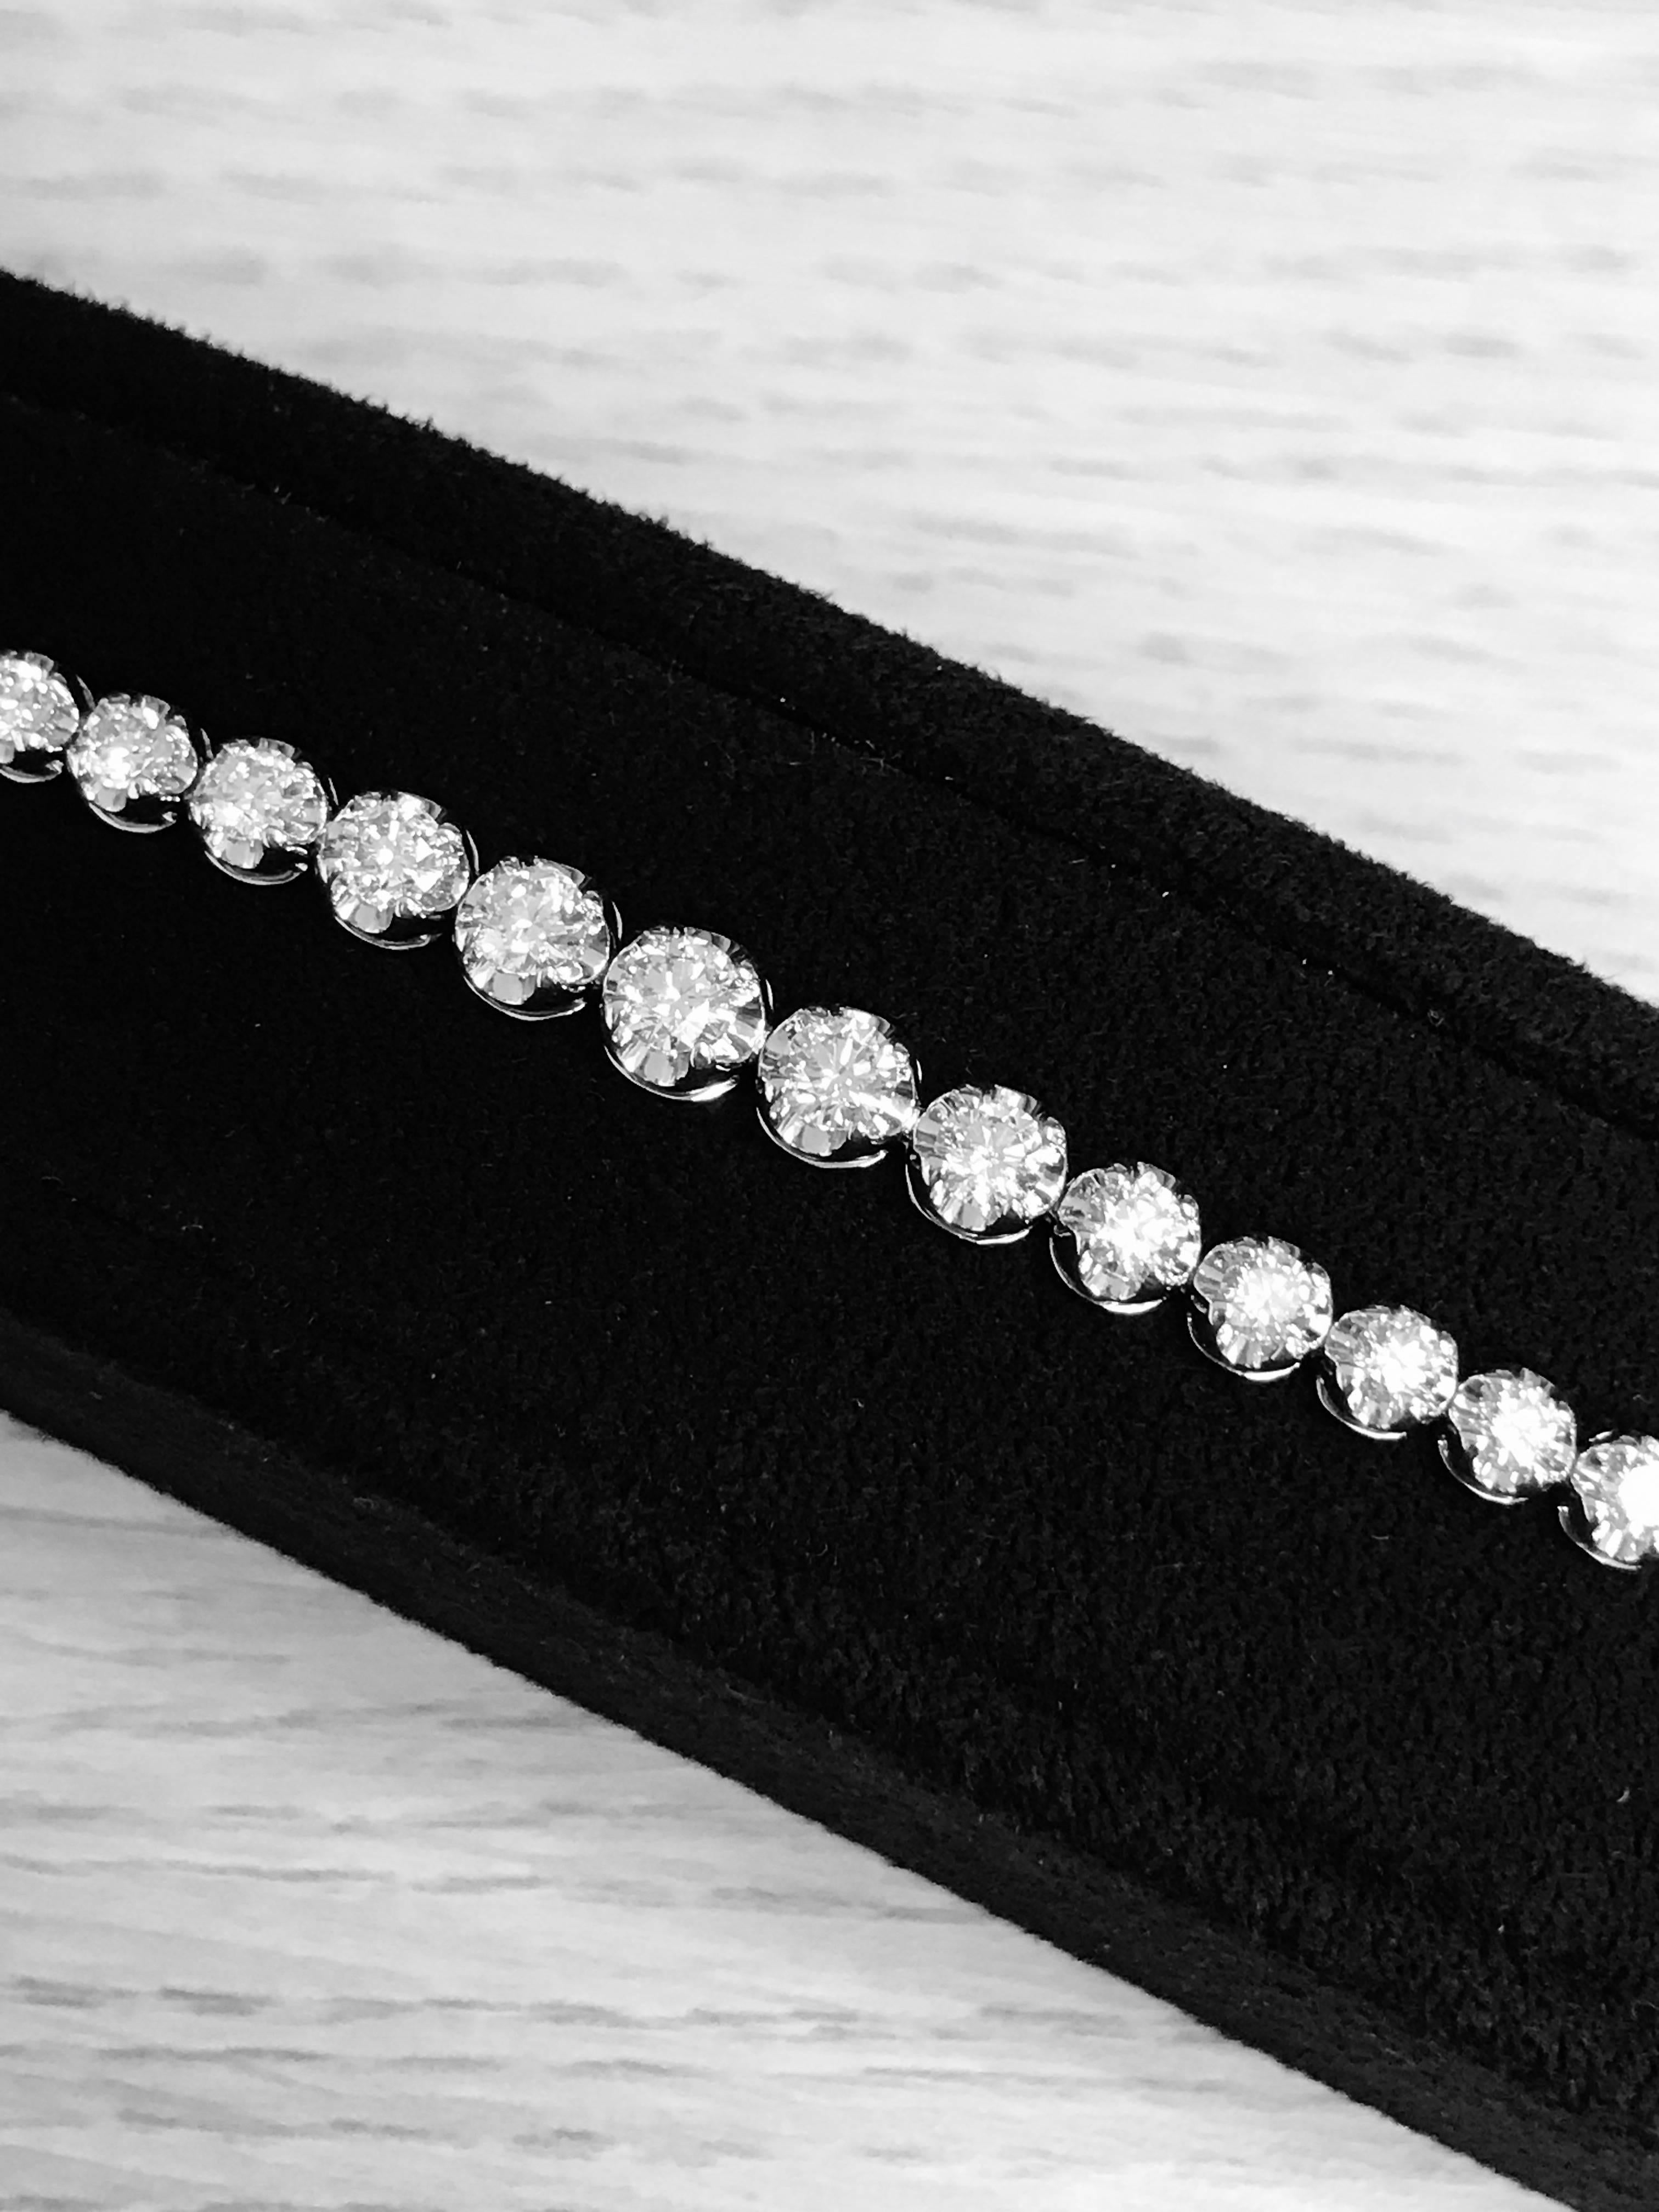 A classic look just for her, this 5 Carat . diamond graduated tennis bracelet is certain to take her breath away. Fashioned in white gold, this eternal design features a brilliant array of sparkling round diamonds arranged so the bigger diamonds are